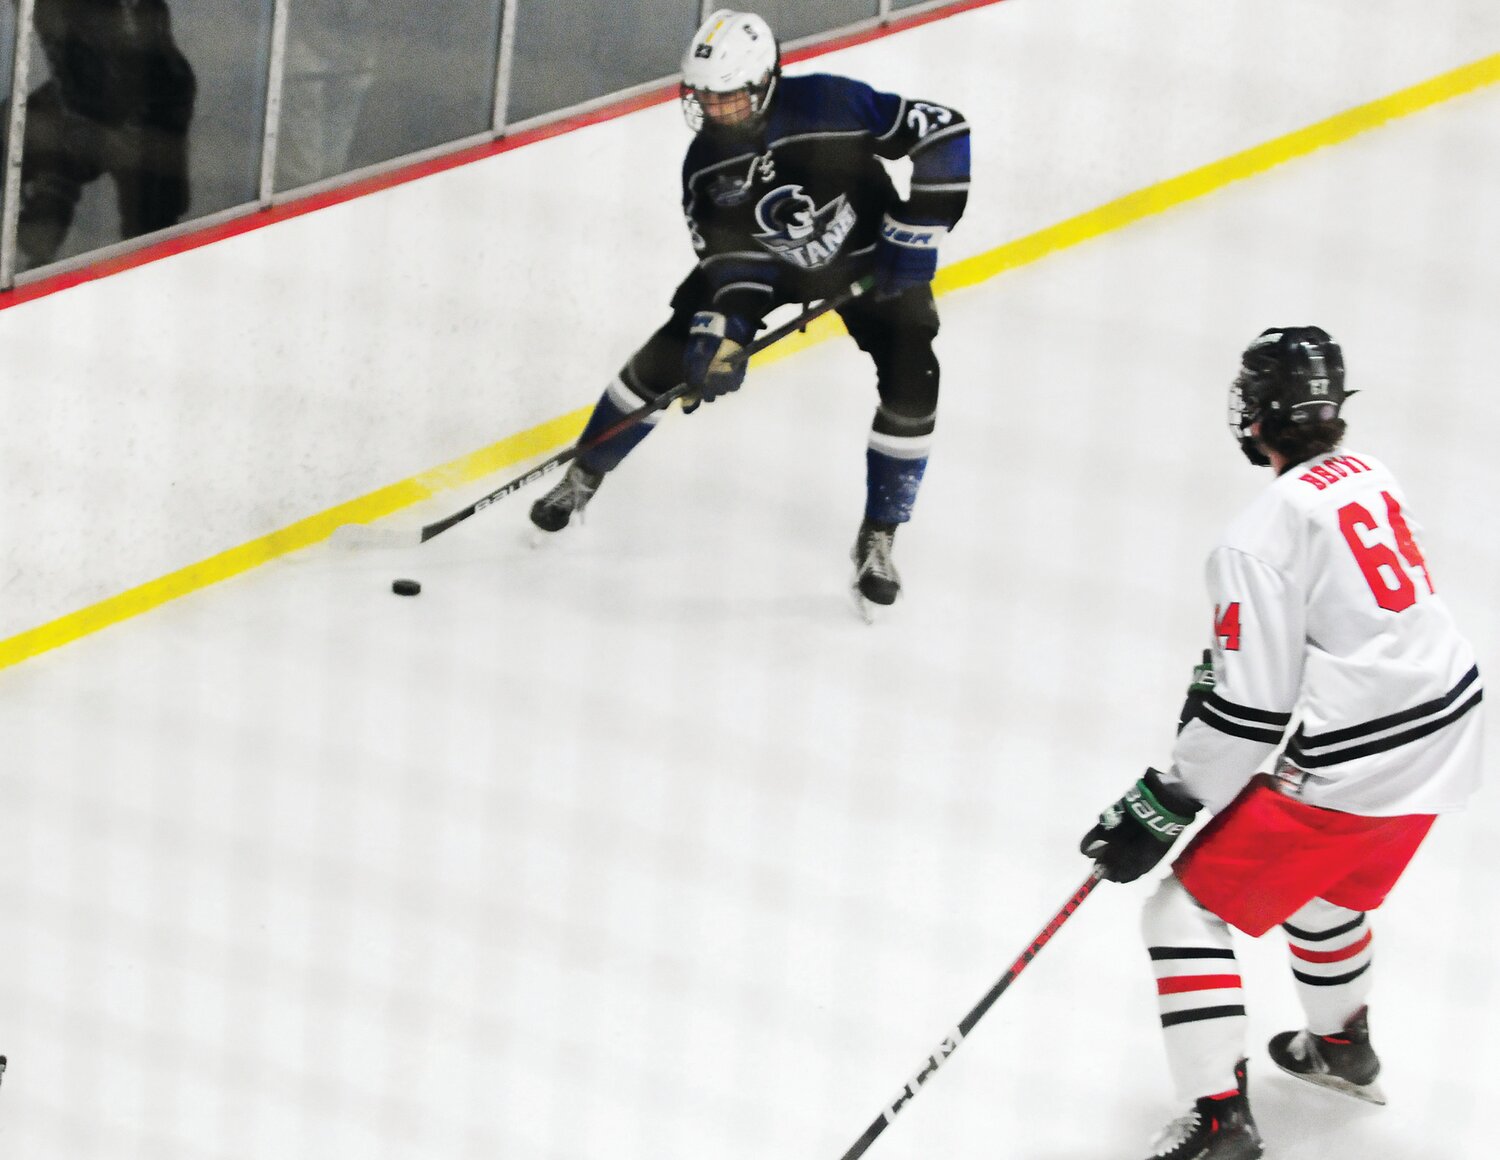 Colin Mendam handles the puck for CB South defended by David Brown for CB East.